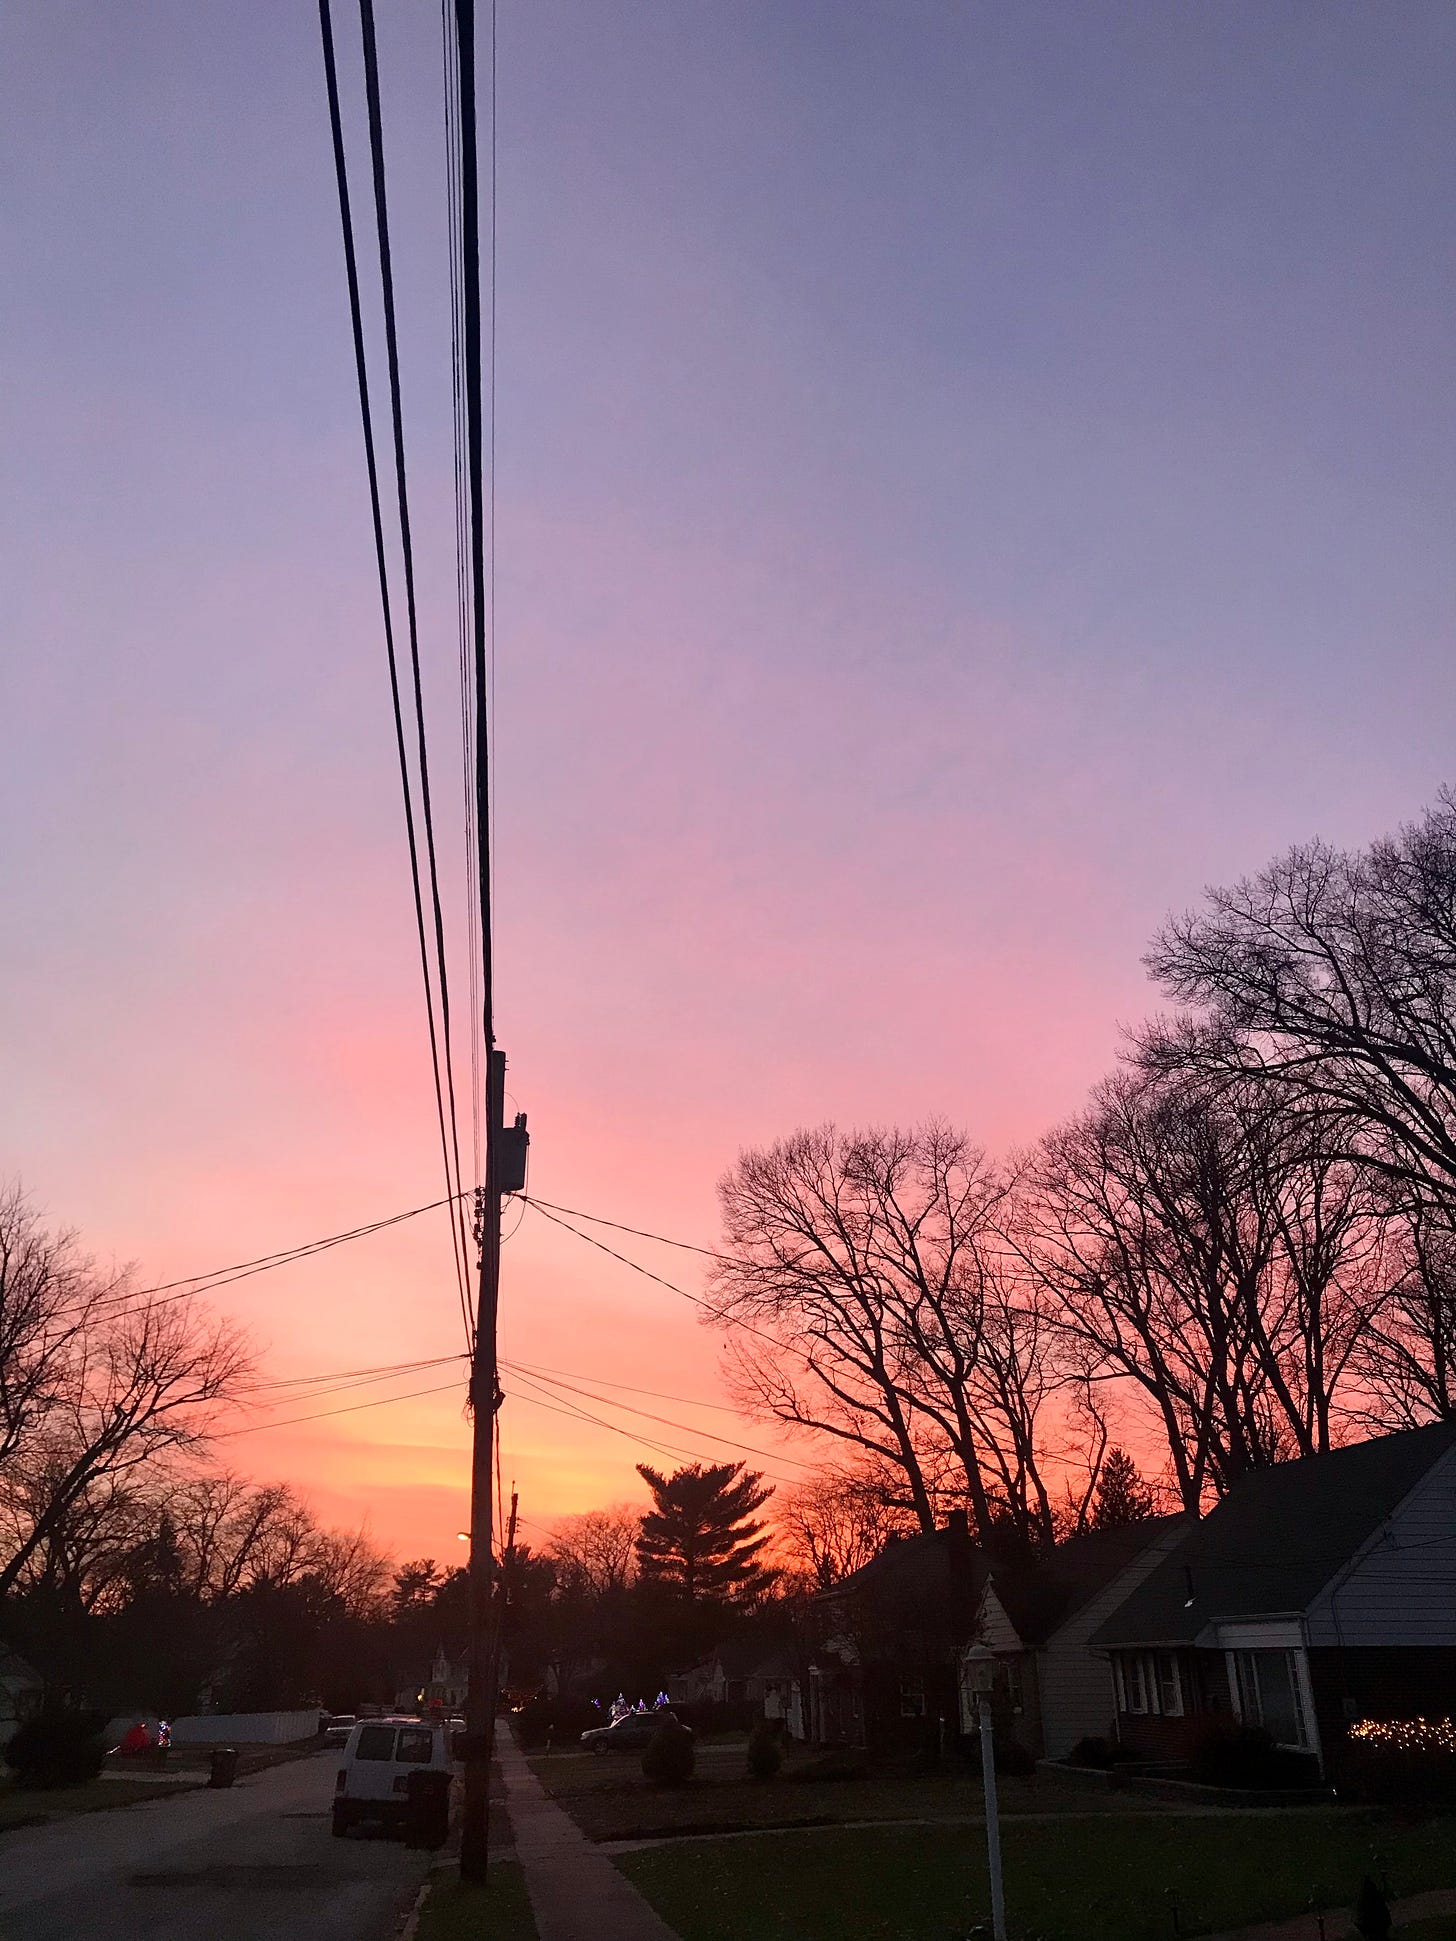 Profile orientation of black leafless trees and black phone wire against a gold and purple sunset, or sunrise.